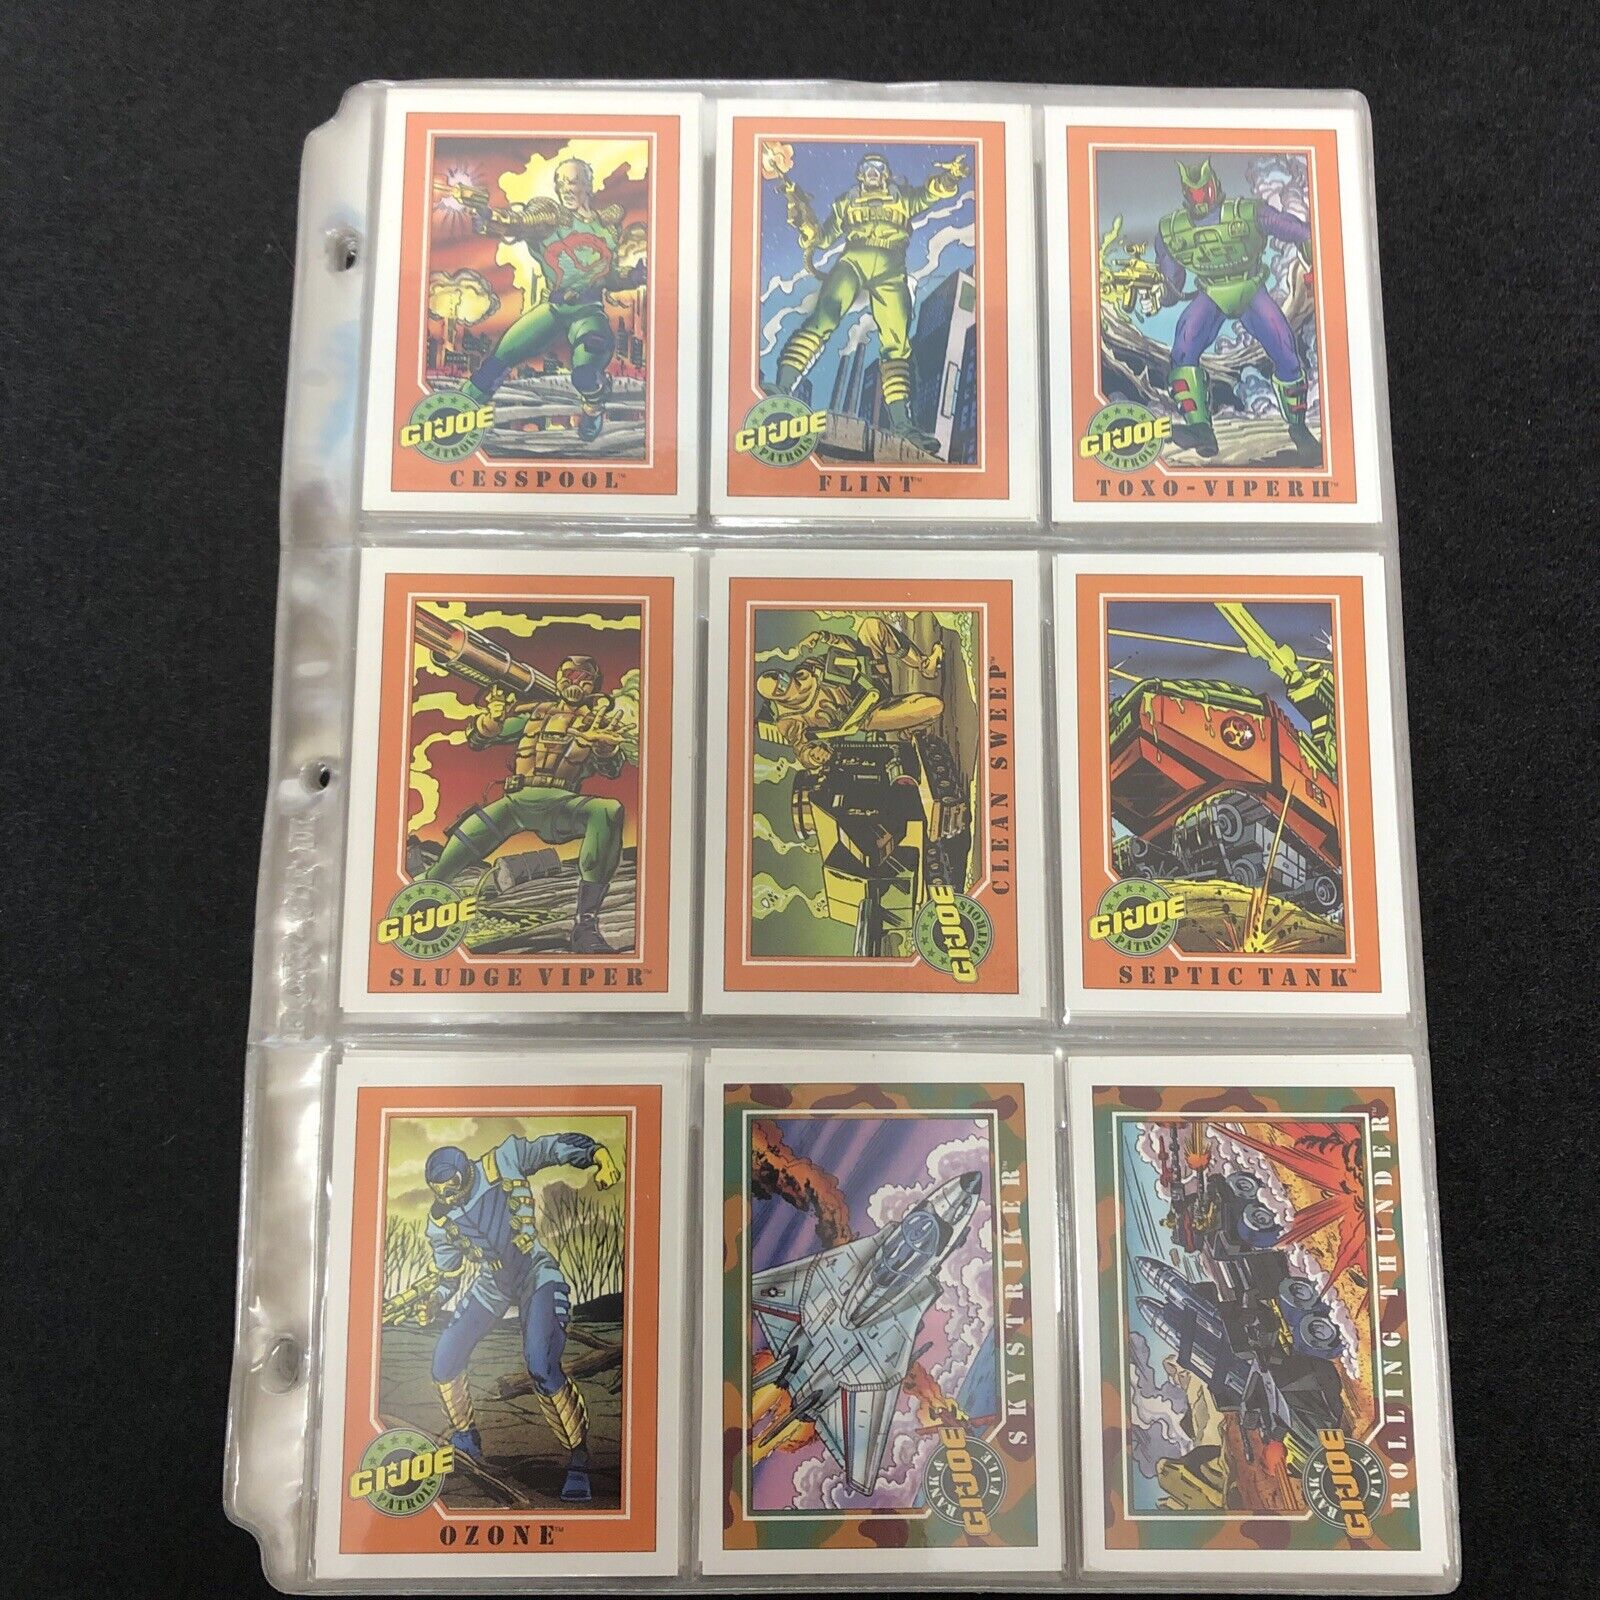 1991 Impel GI Joe Trading Cards Series 1 Complete Set - In Sheets #1-200 *NICE*